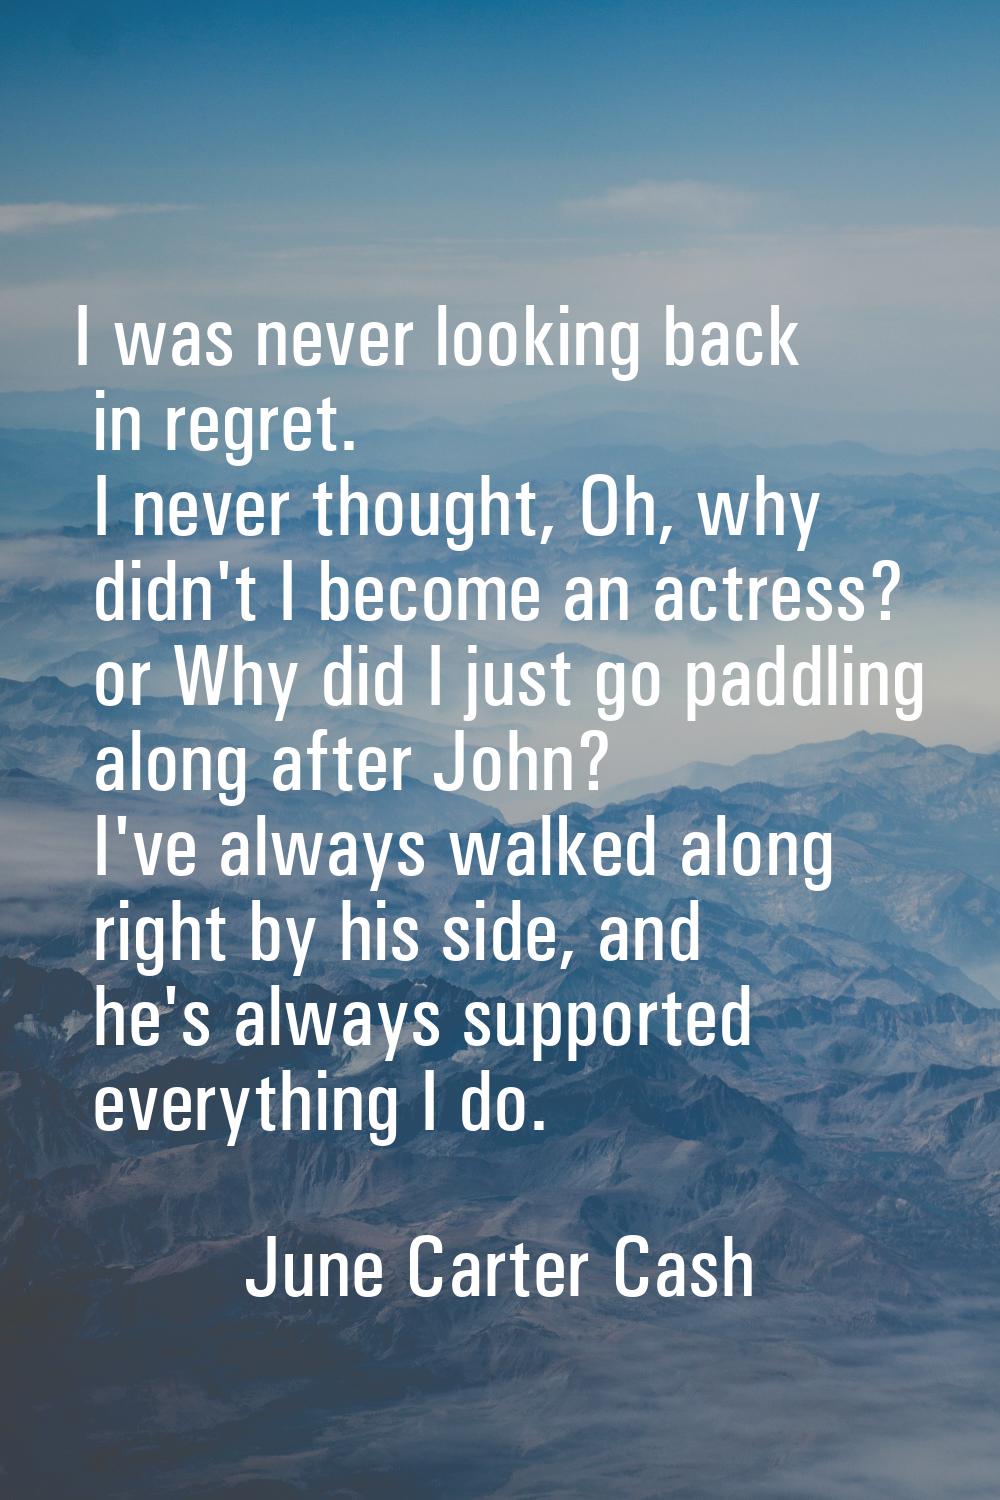 I was never looking back in regret. I never thought, Oh, why didn't I become an actress? or Why did